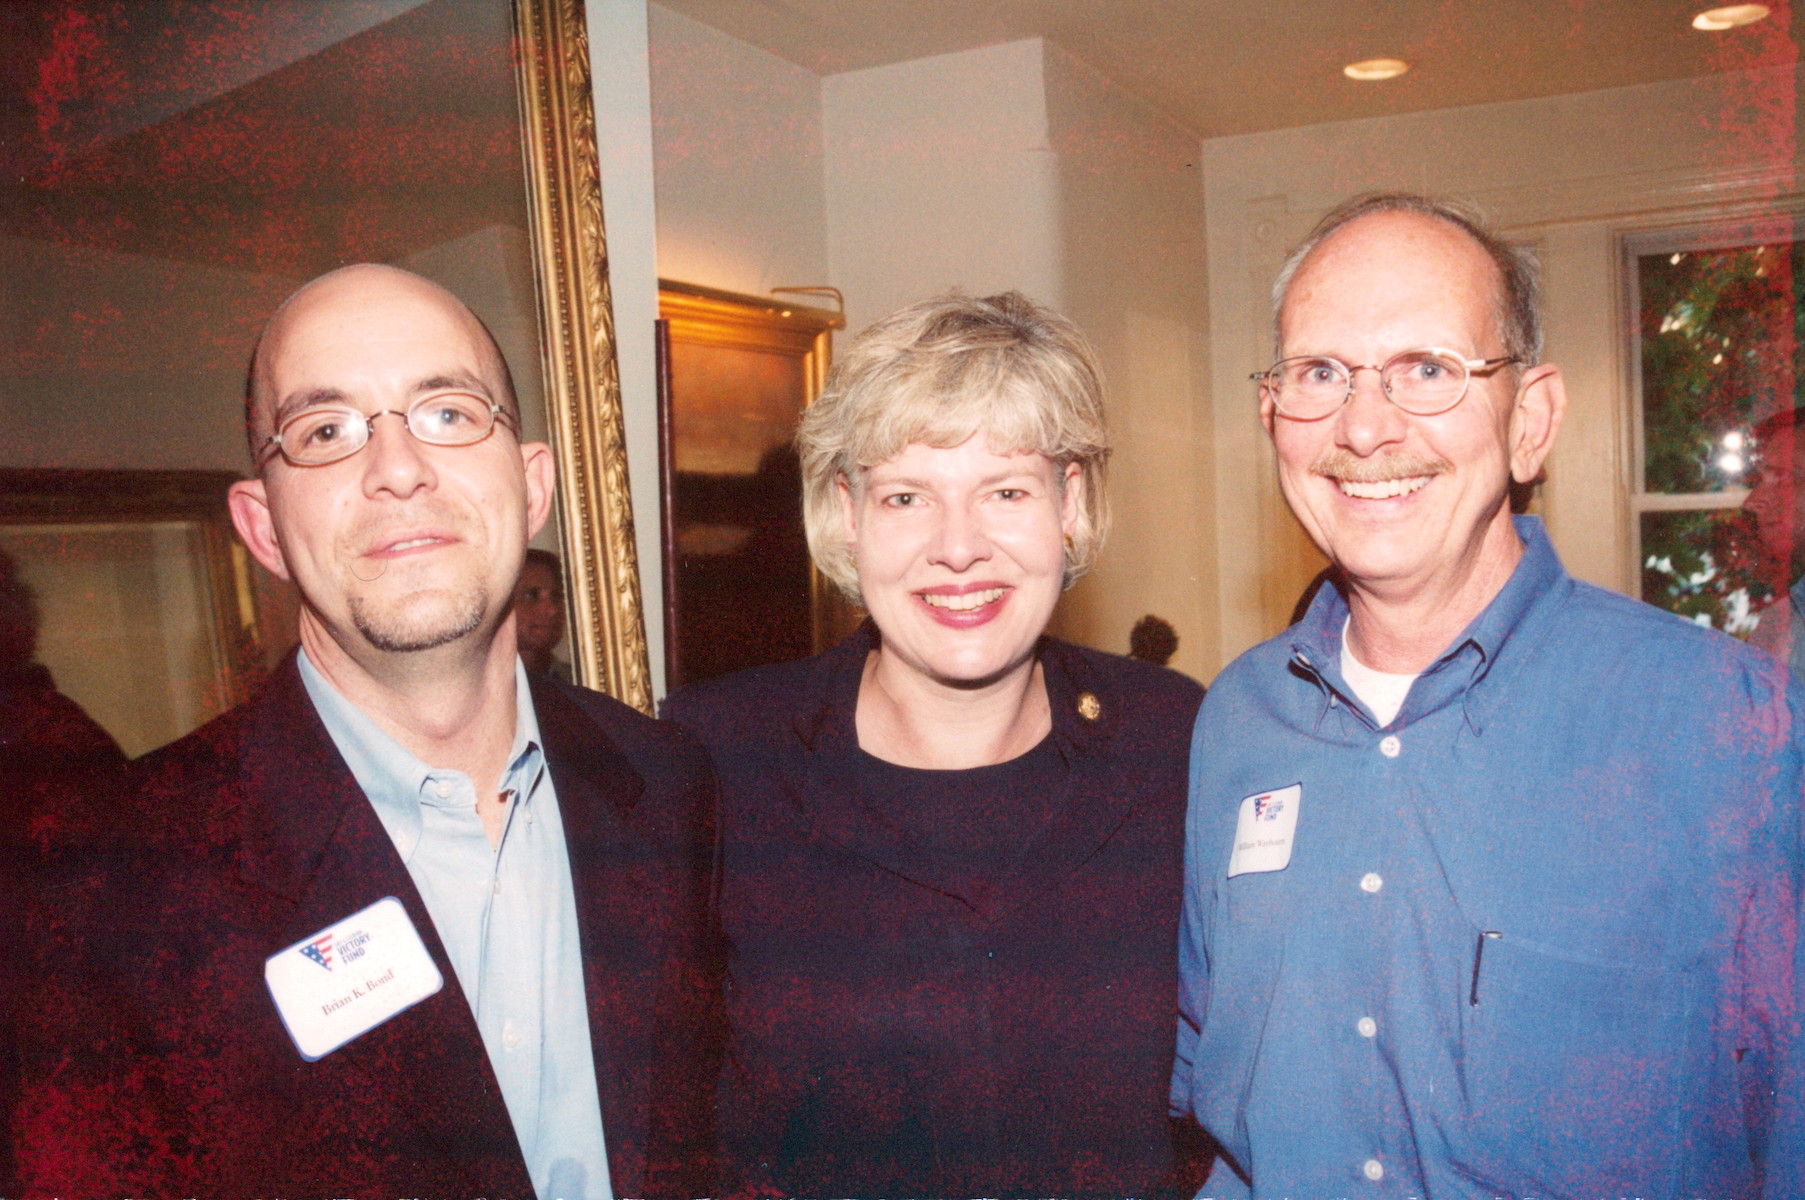 L-R: Former Victory Fund Executive Director Brian Bond, Senator Tammy Baldwin (D-WI), and William Waybourn at a Victory Fund event, Washington, DC, circa 1996. William shares, “During my tenure at the Victory Fund, I supported Tammy in her successful race as a Dane County (WI) Supervisor. During Brian’s tenure, the Victory Fund supported her successful race as a U.S. Congresswoman.” Photo courtesy of William Waybourn.